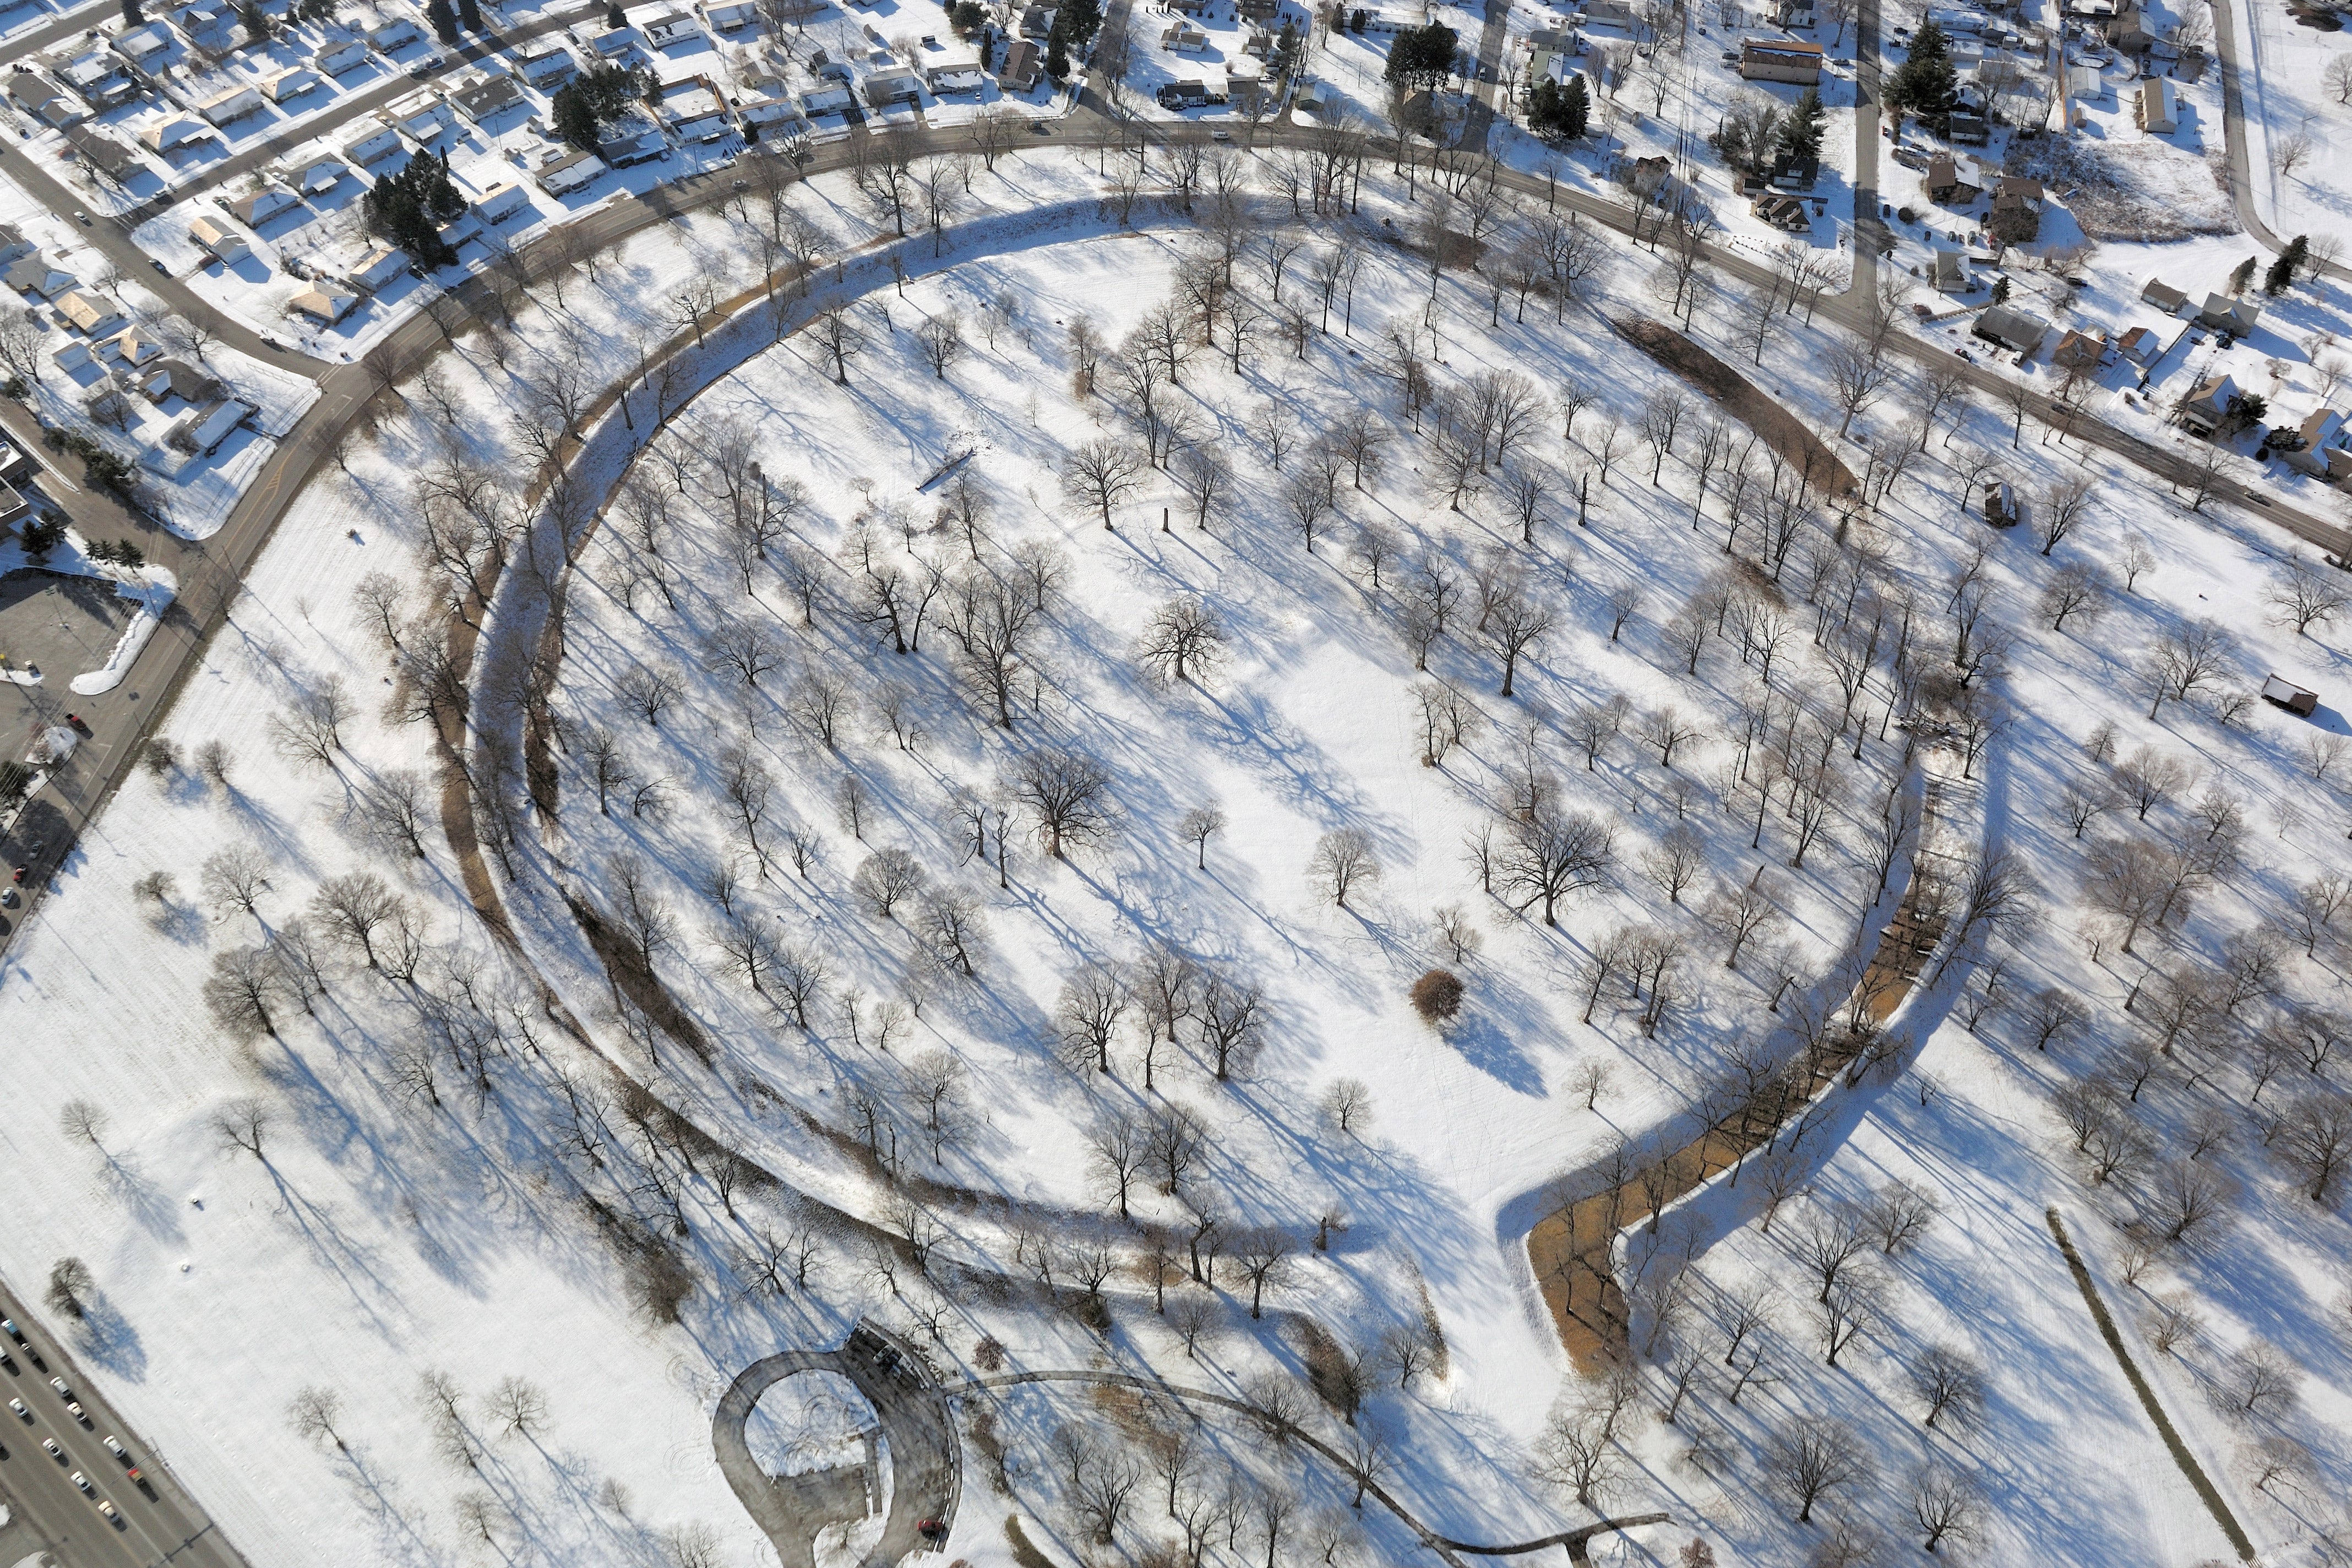 The circles and walls of the ancient historic site are particularly striking in the snow. 